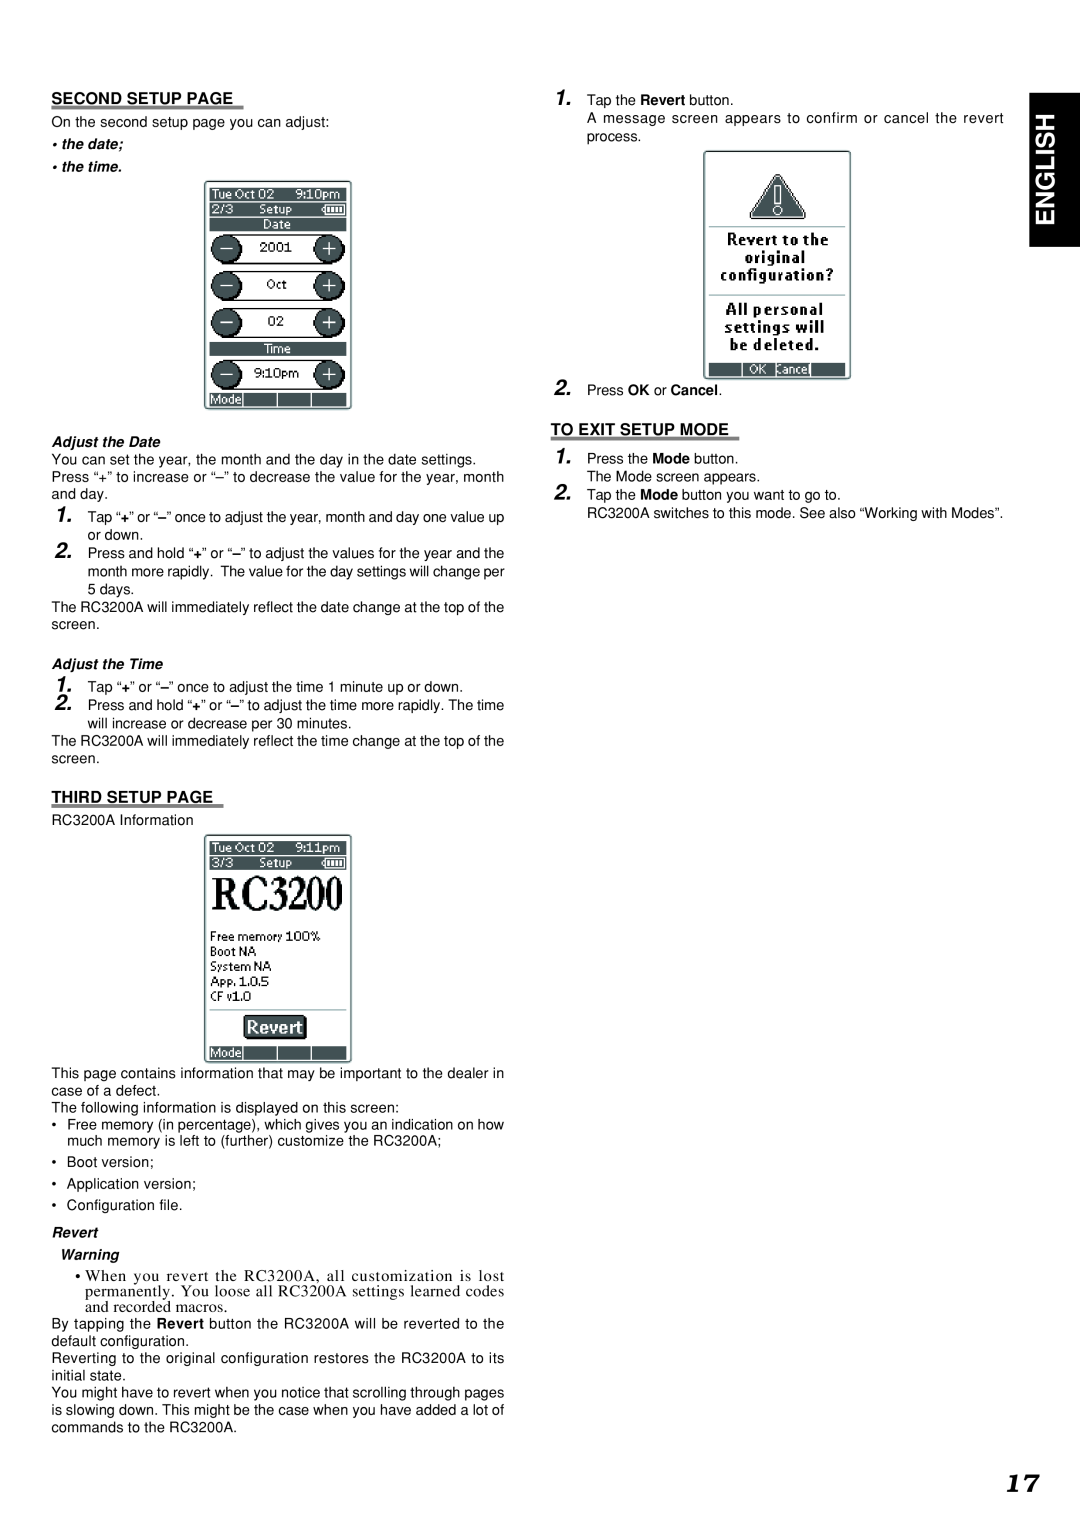 Marantz SR8200 English, Second Setup Page, Third Setup Page, To Exit Setup Mode, •the date •the time, Adjust the Date 